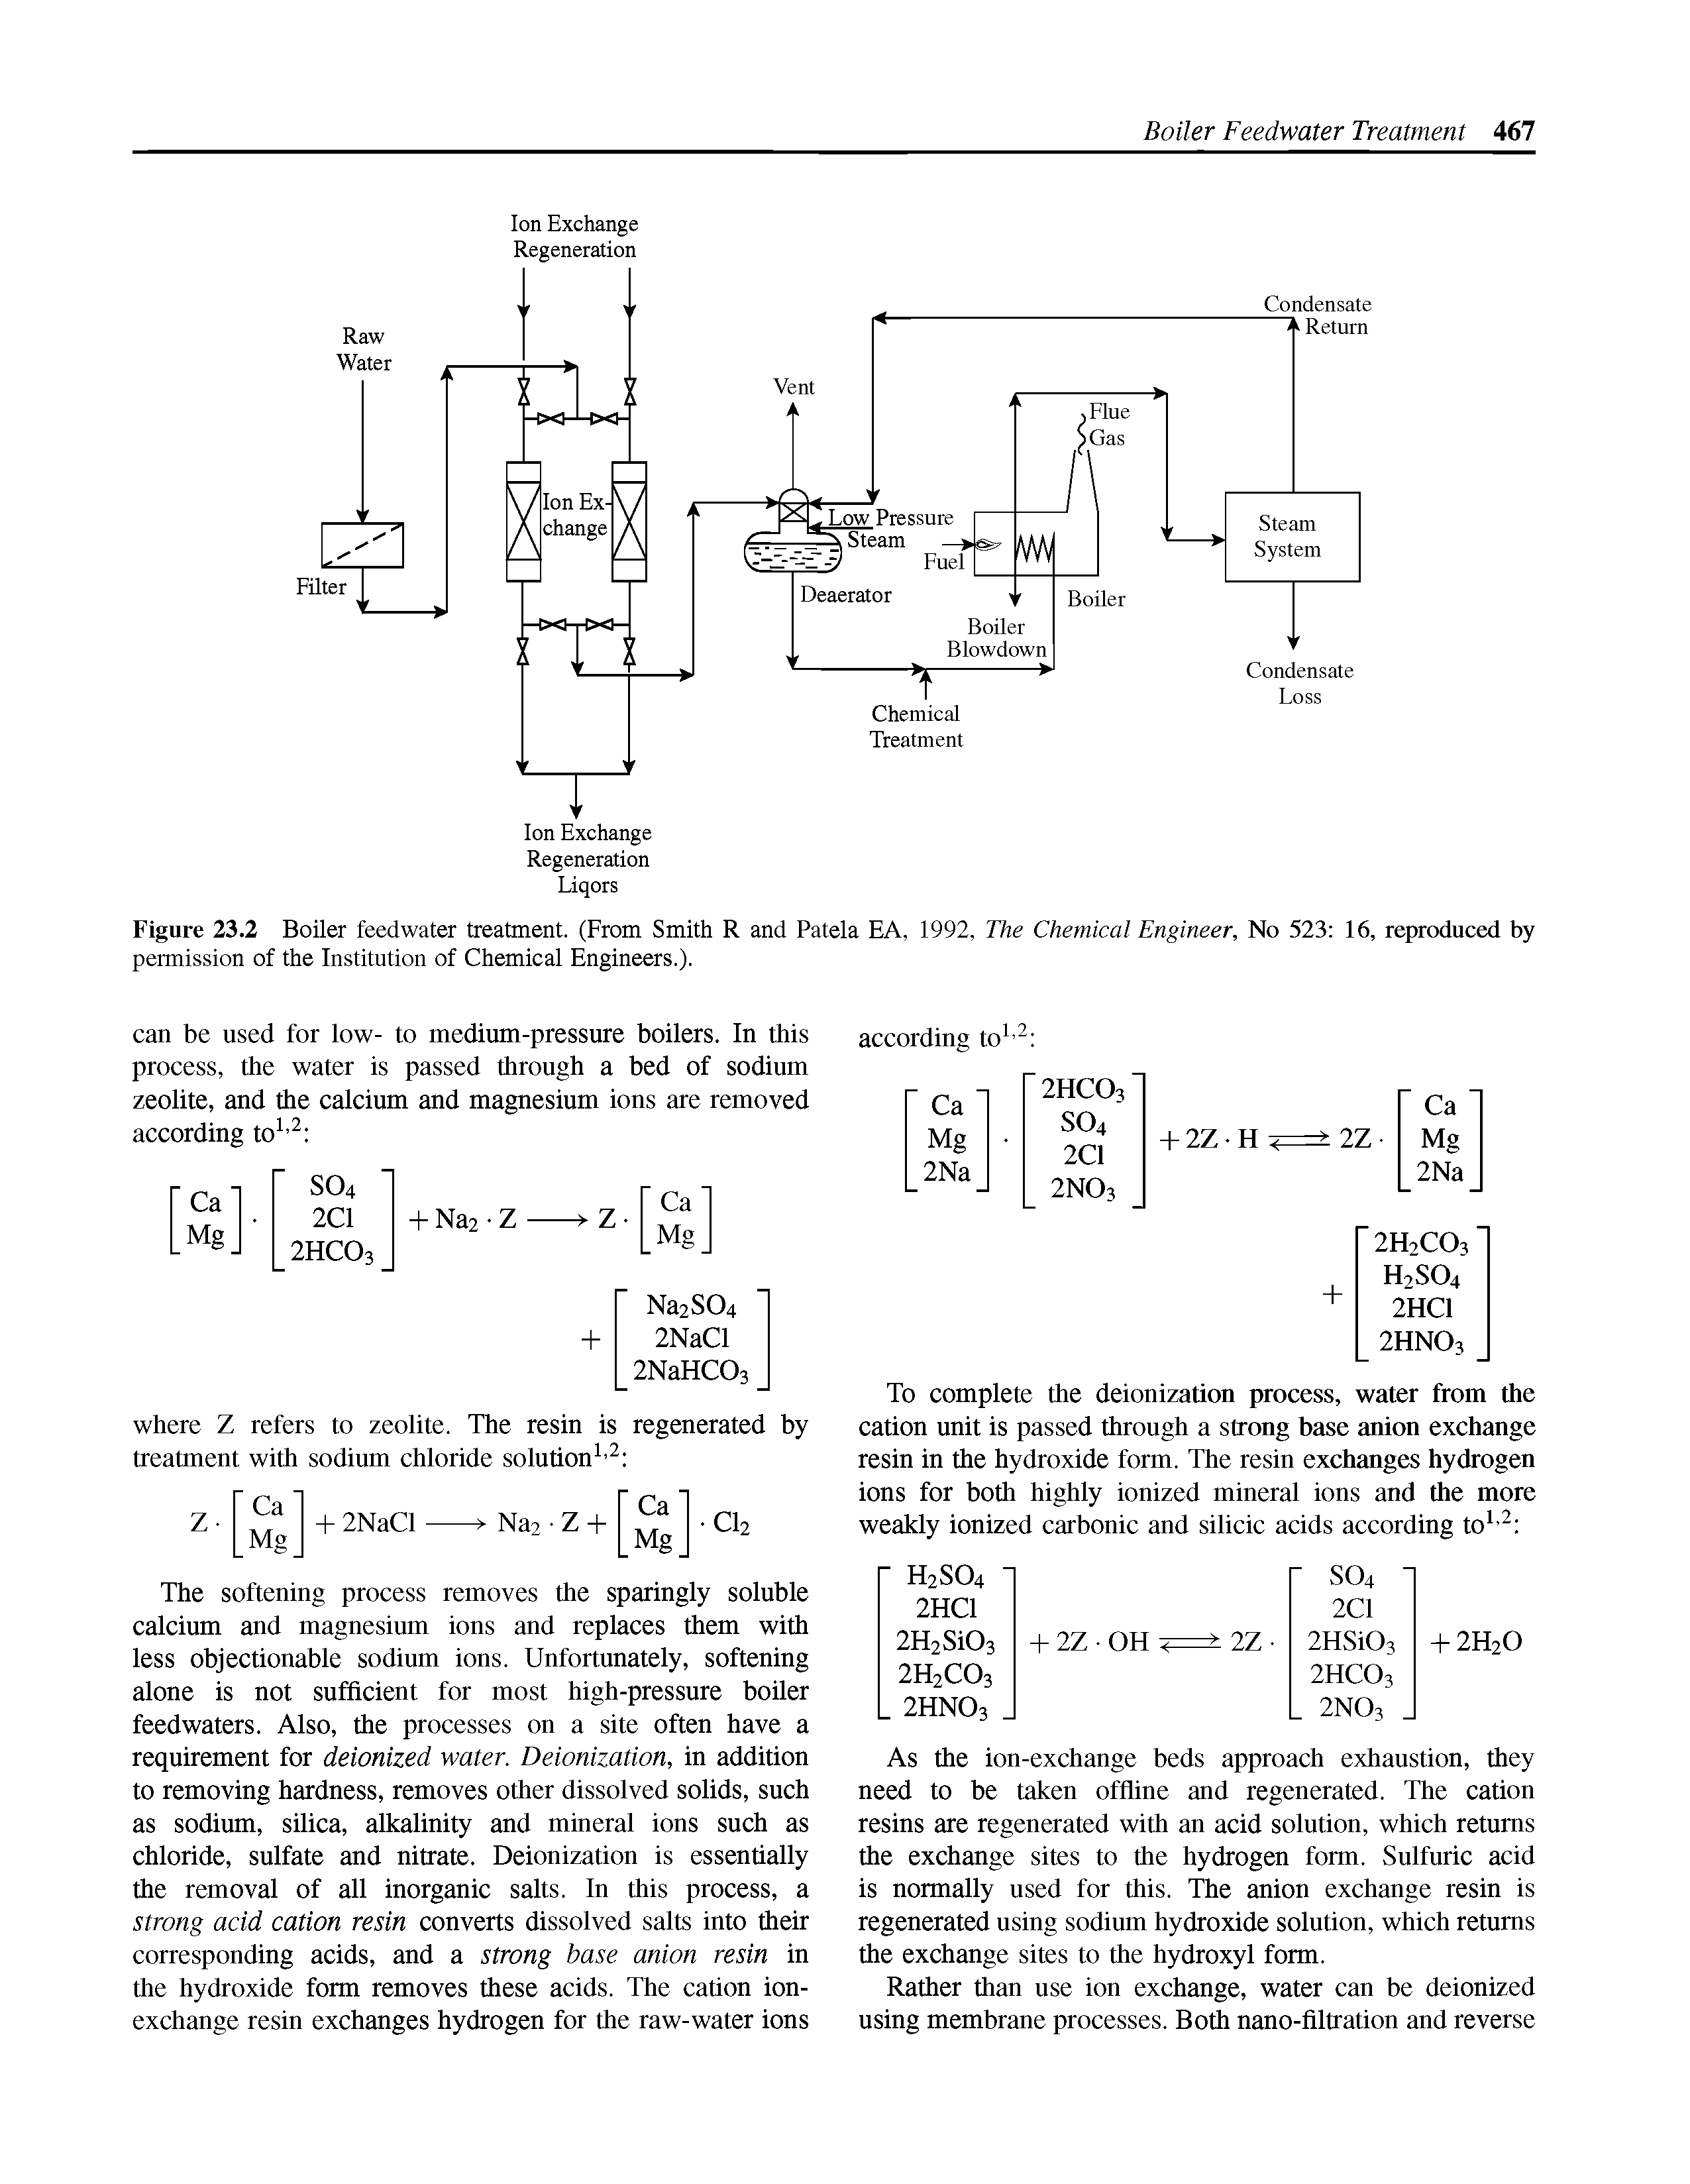 Figure 23.2 Boiler feedwater treatment. (From Smith R and Patela EA, 1992, The Chemical Engineer, No 523 16, reproduced by permission of the Institution of Chemical Engineers.).